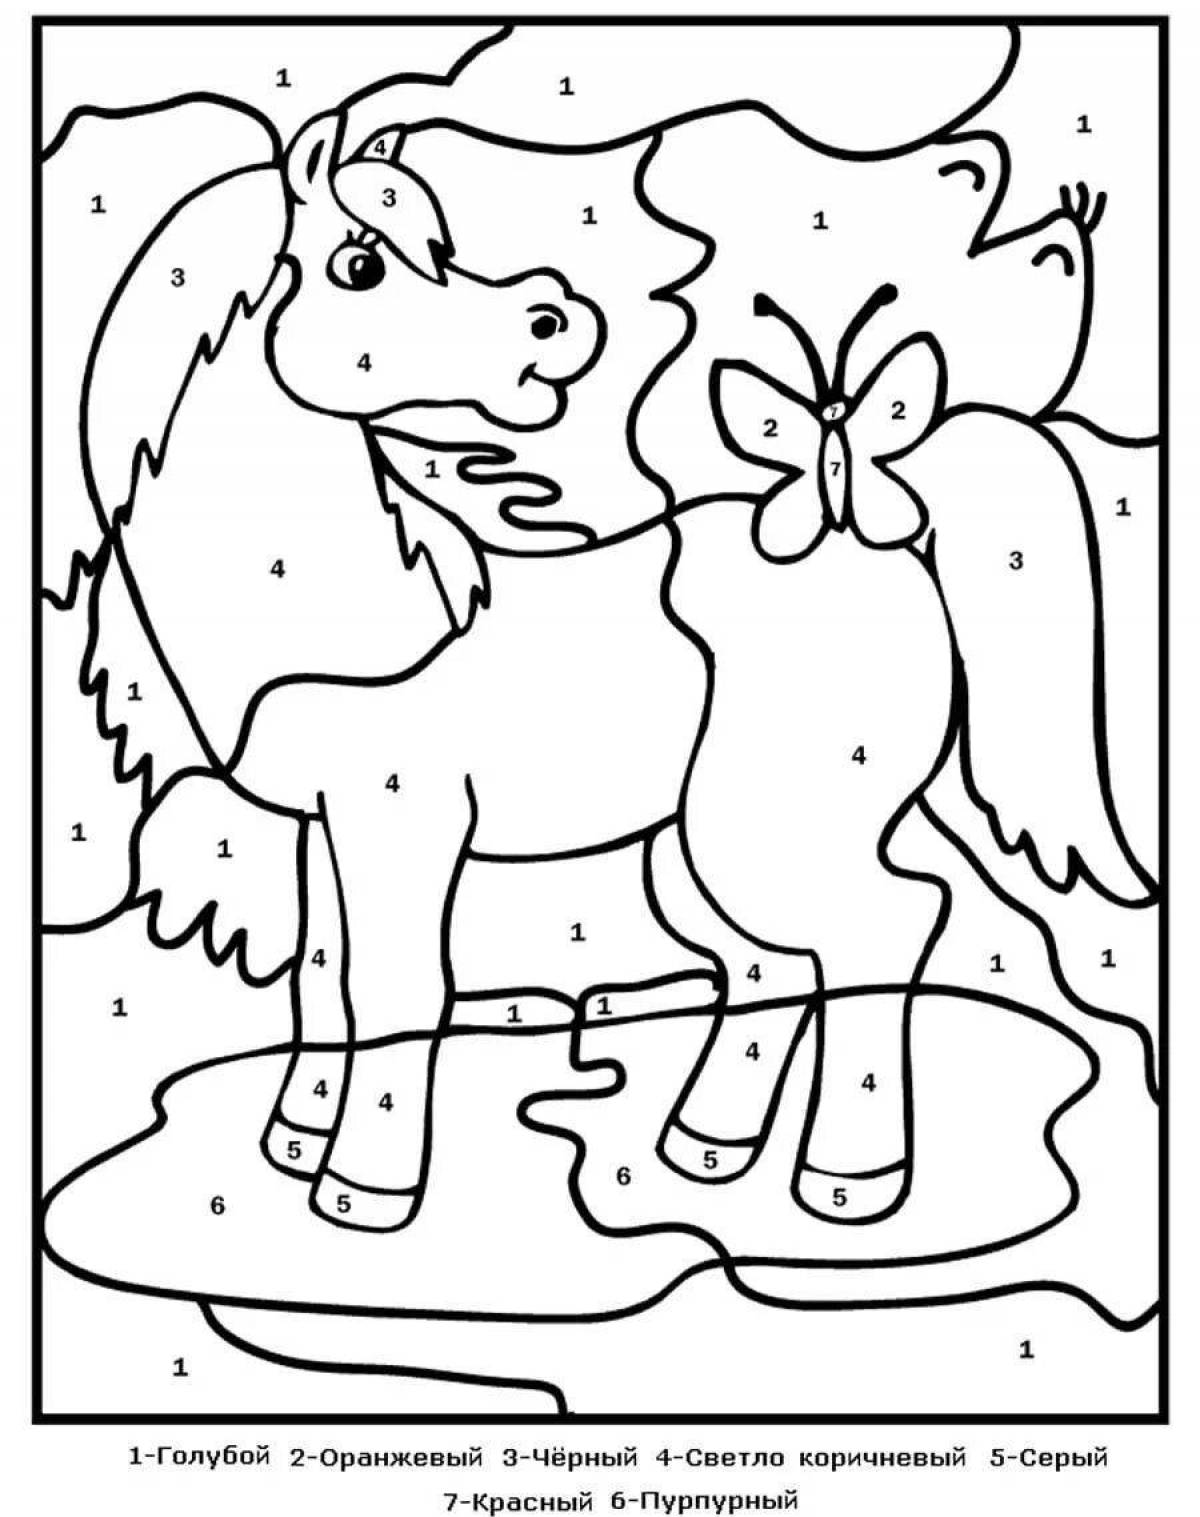 Glitter pet coloring by numbers